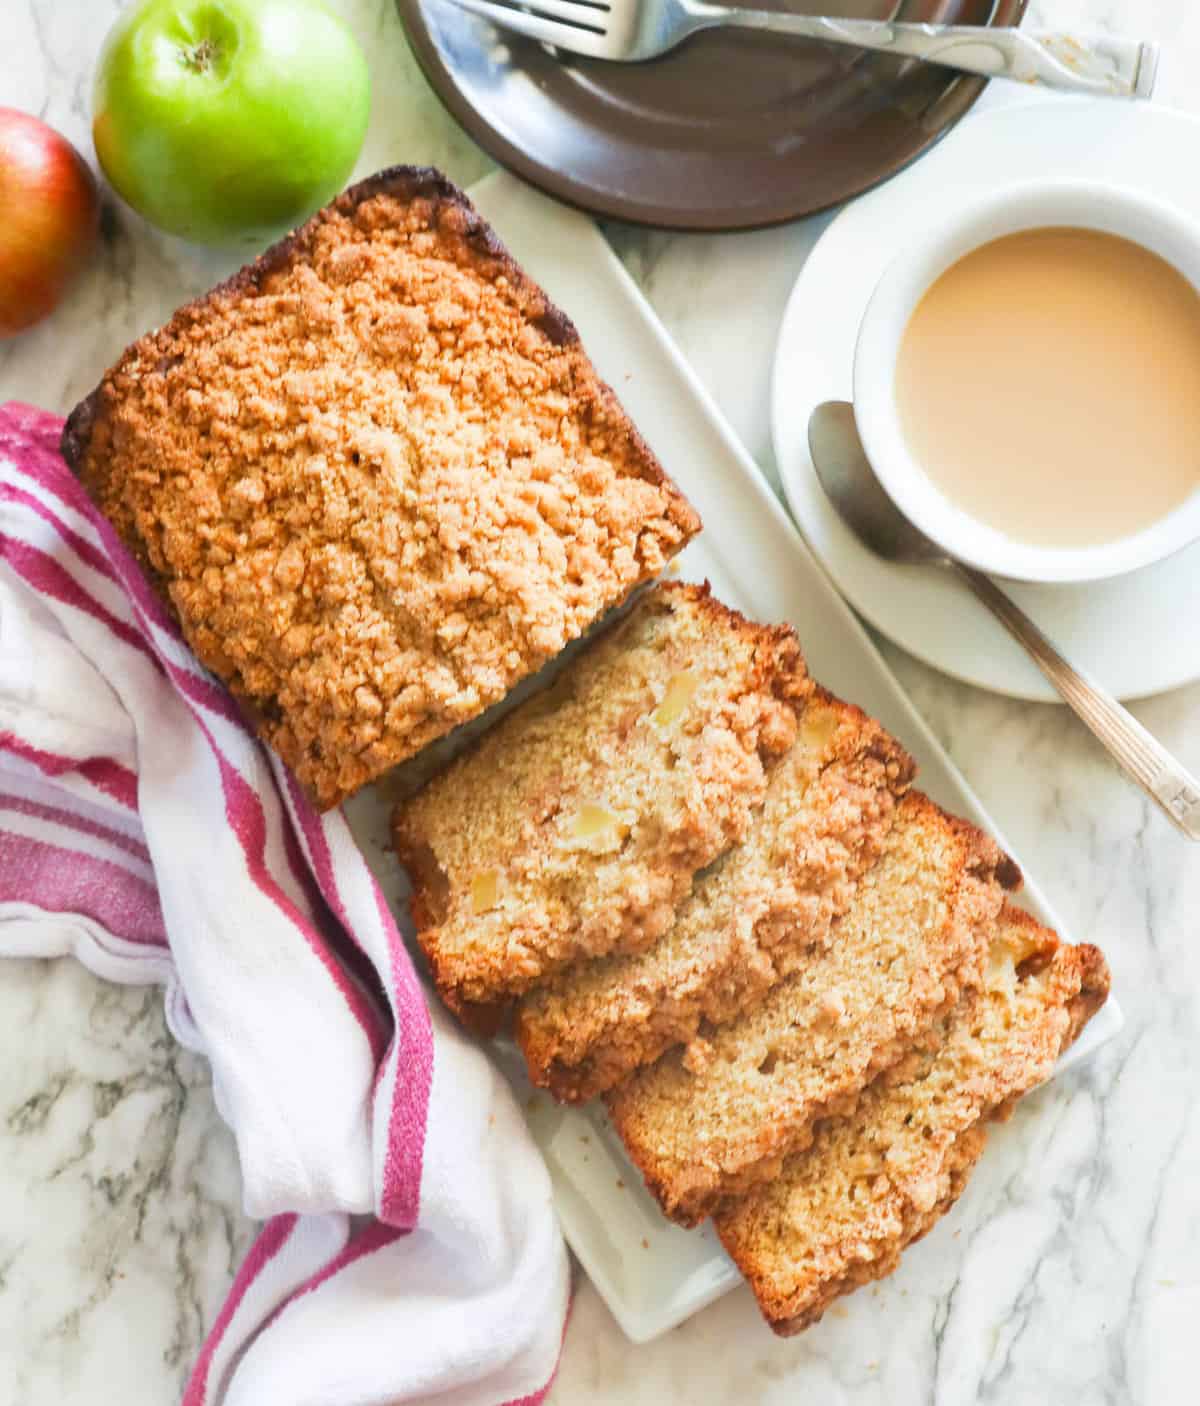 Freshly baked apple bread with a cup of coffee and fresh apples next to it